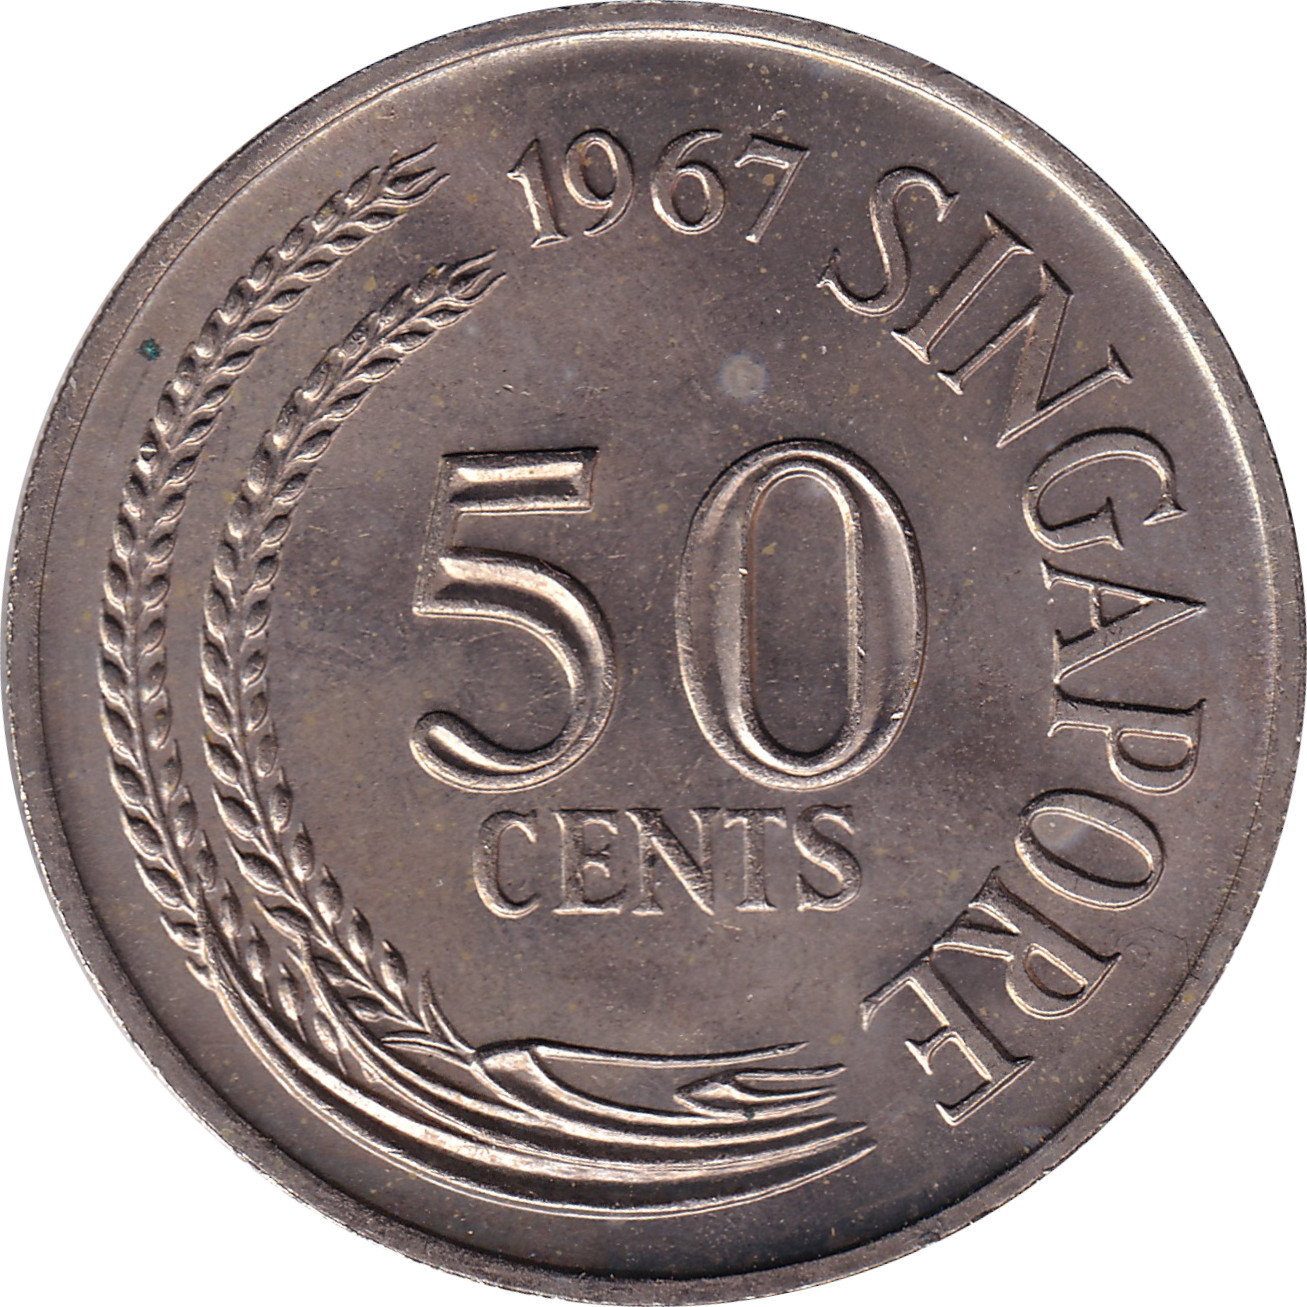 50 cents - Rascasse